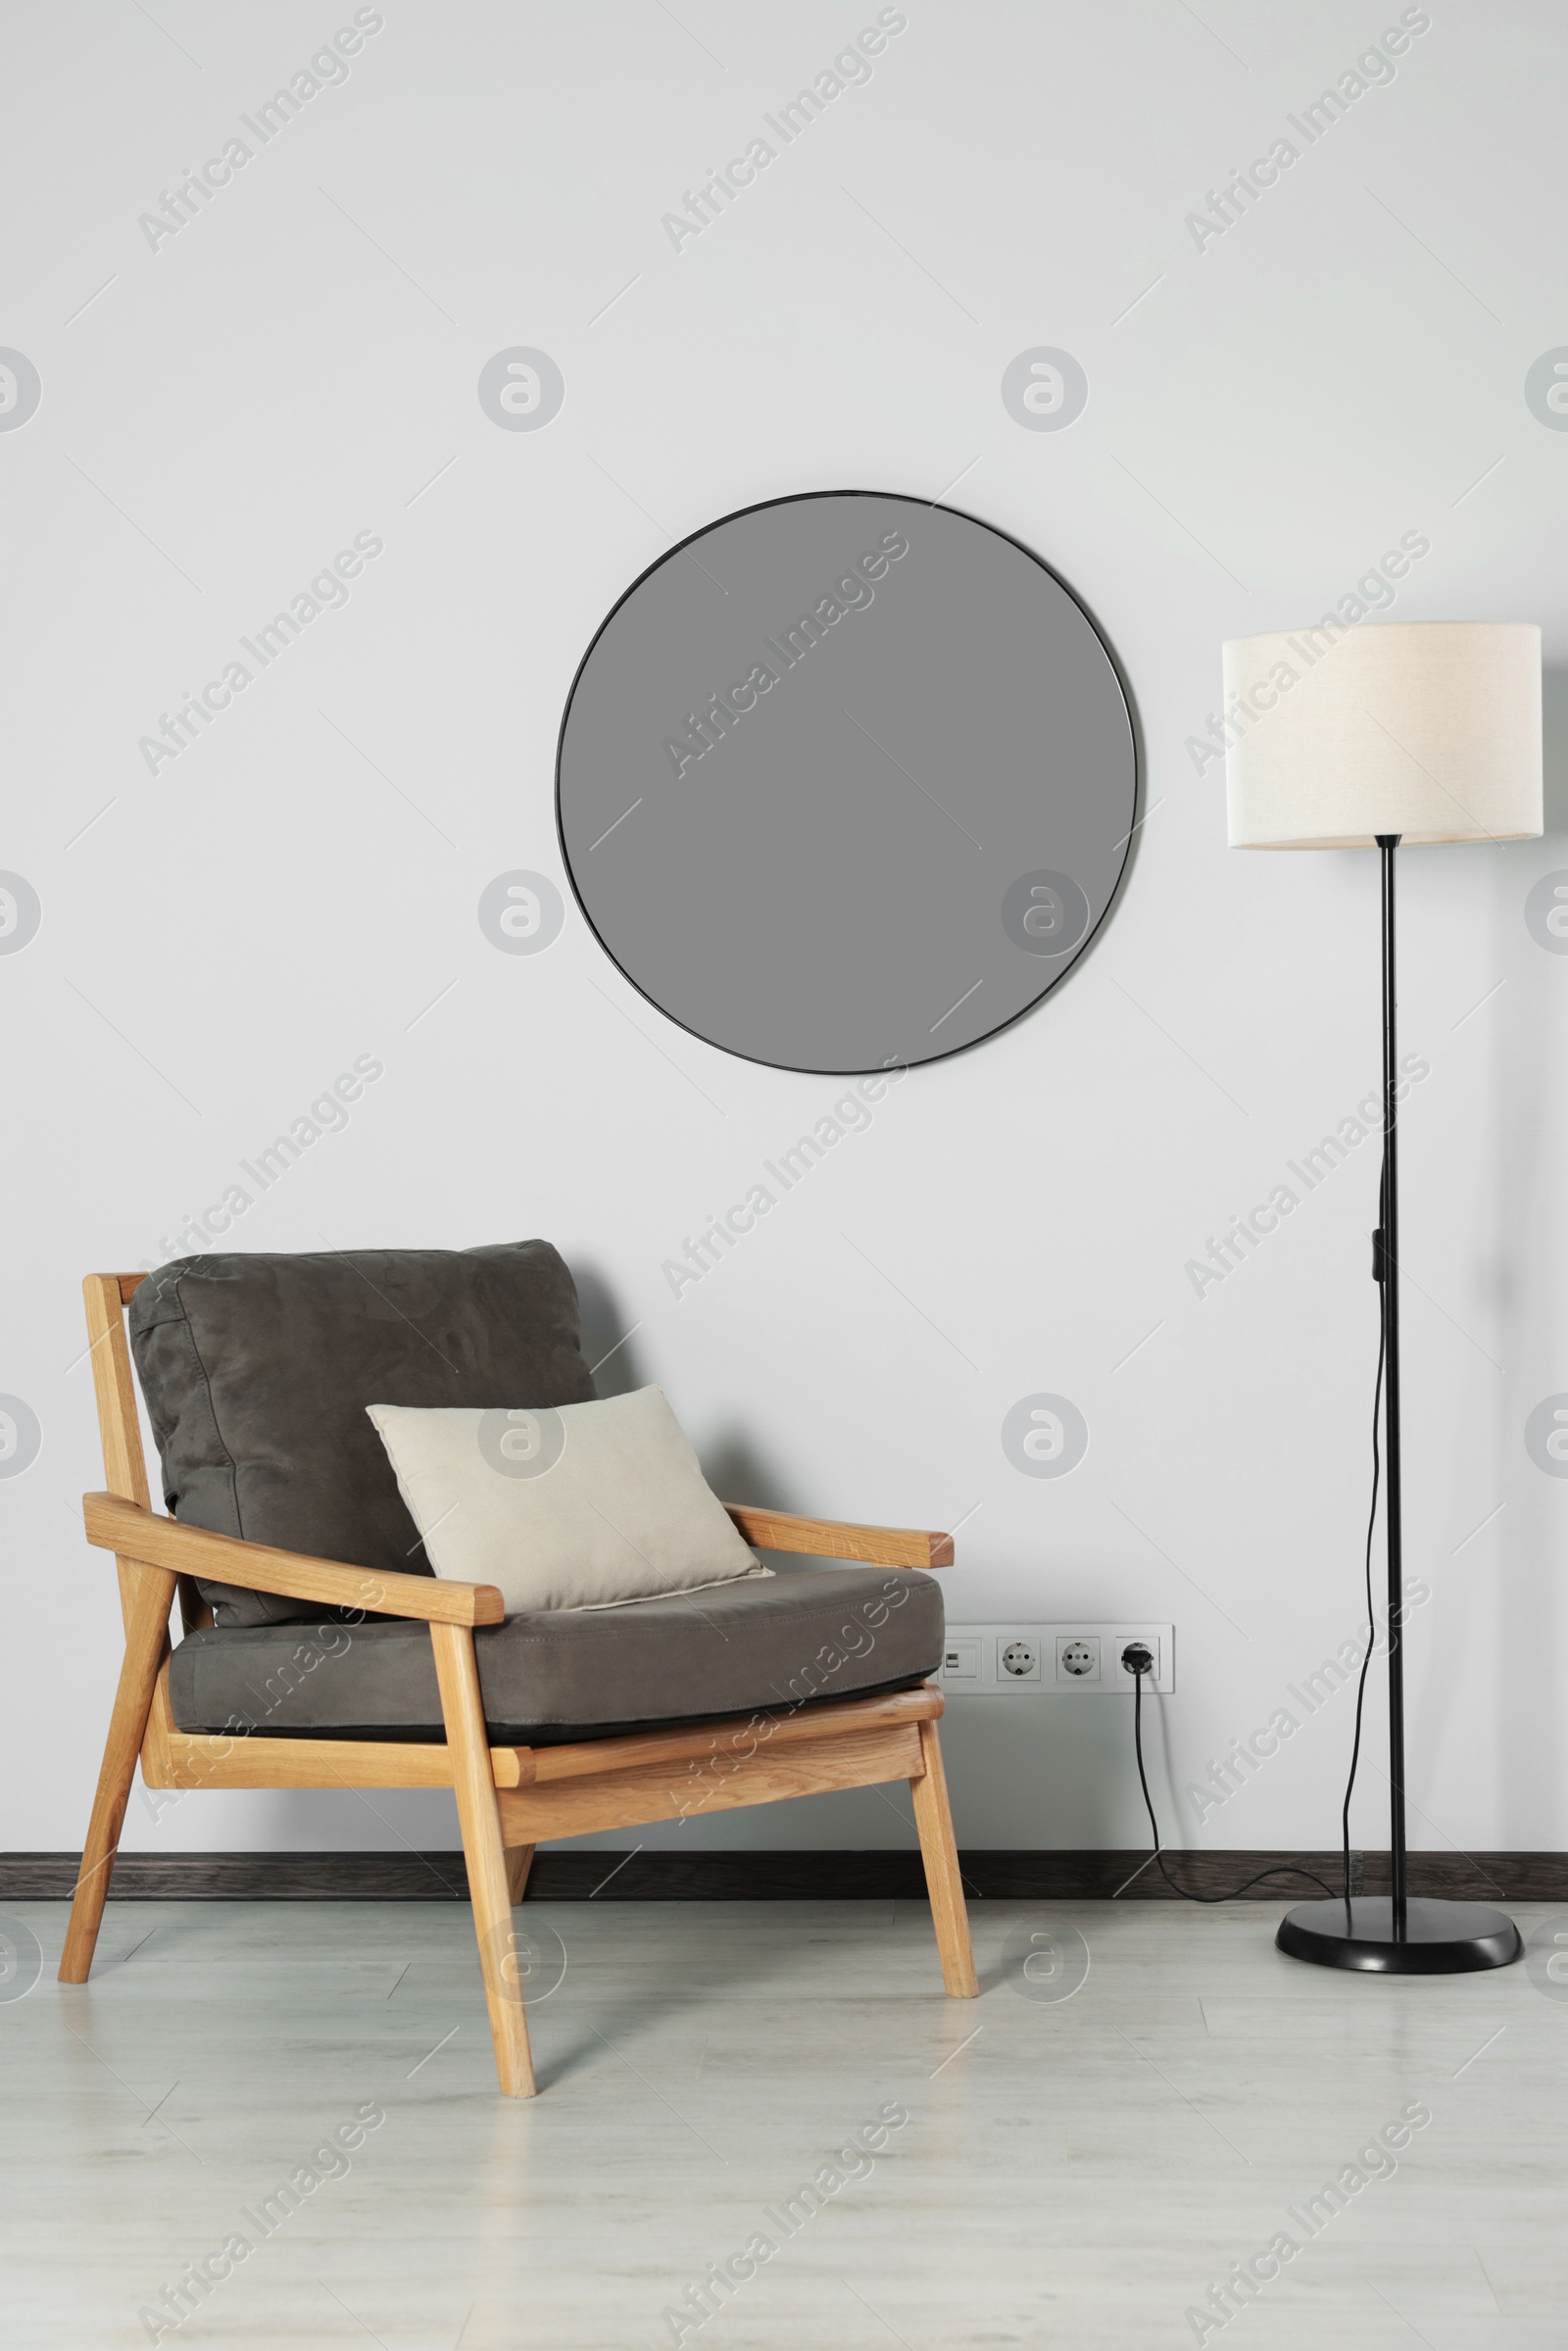 Photo of Stylish round mirror on white wall over armchair in room